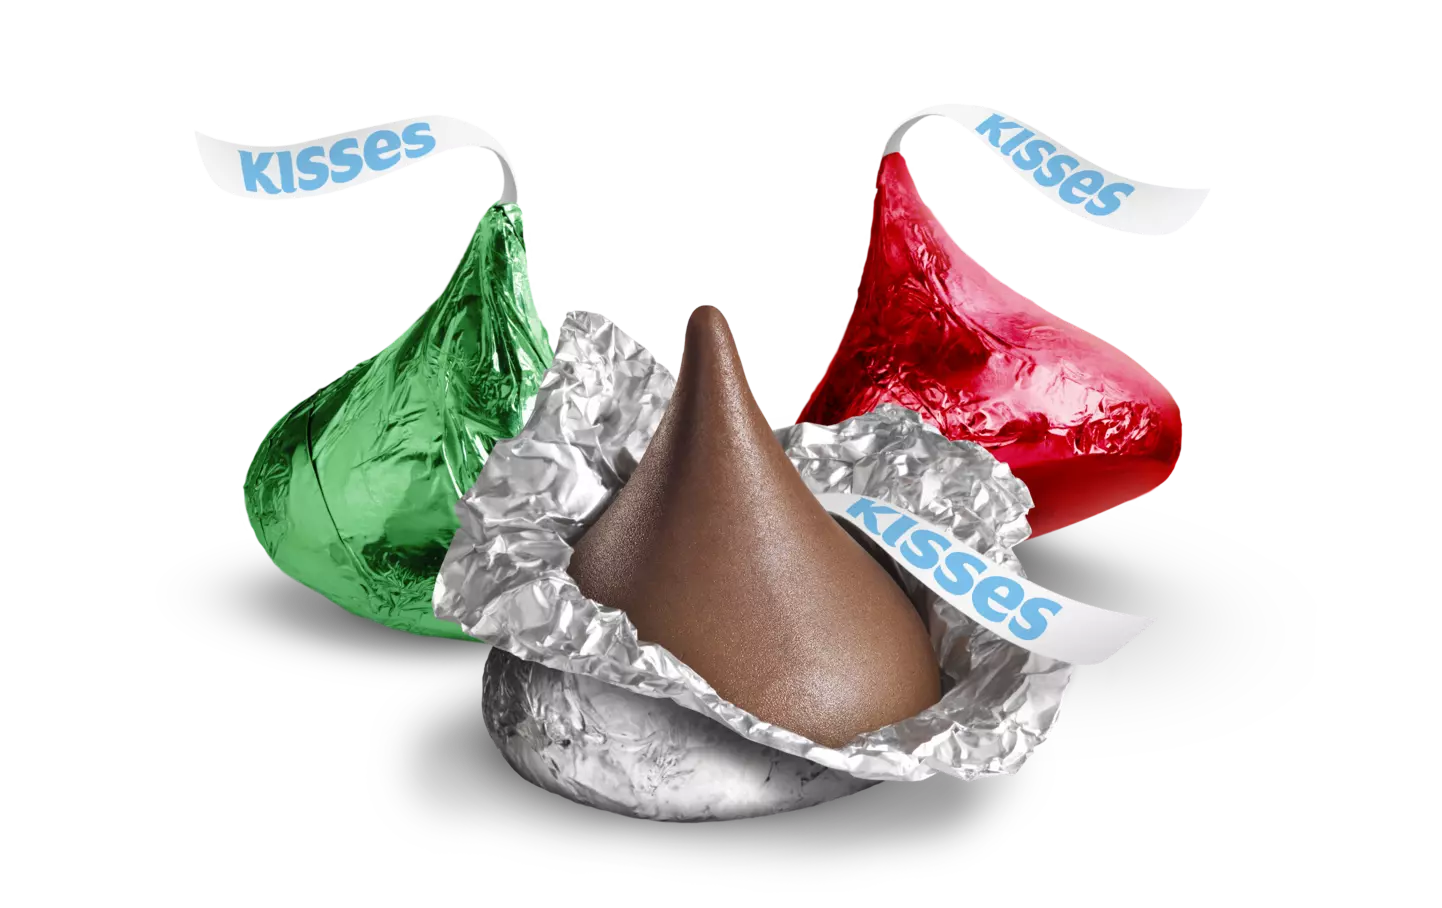 HERSHEY'S KISSES Holiday Milk Chocolate Candy, 7.8 oz bag - Out of Package